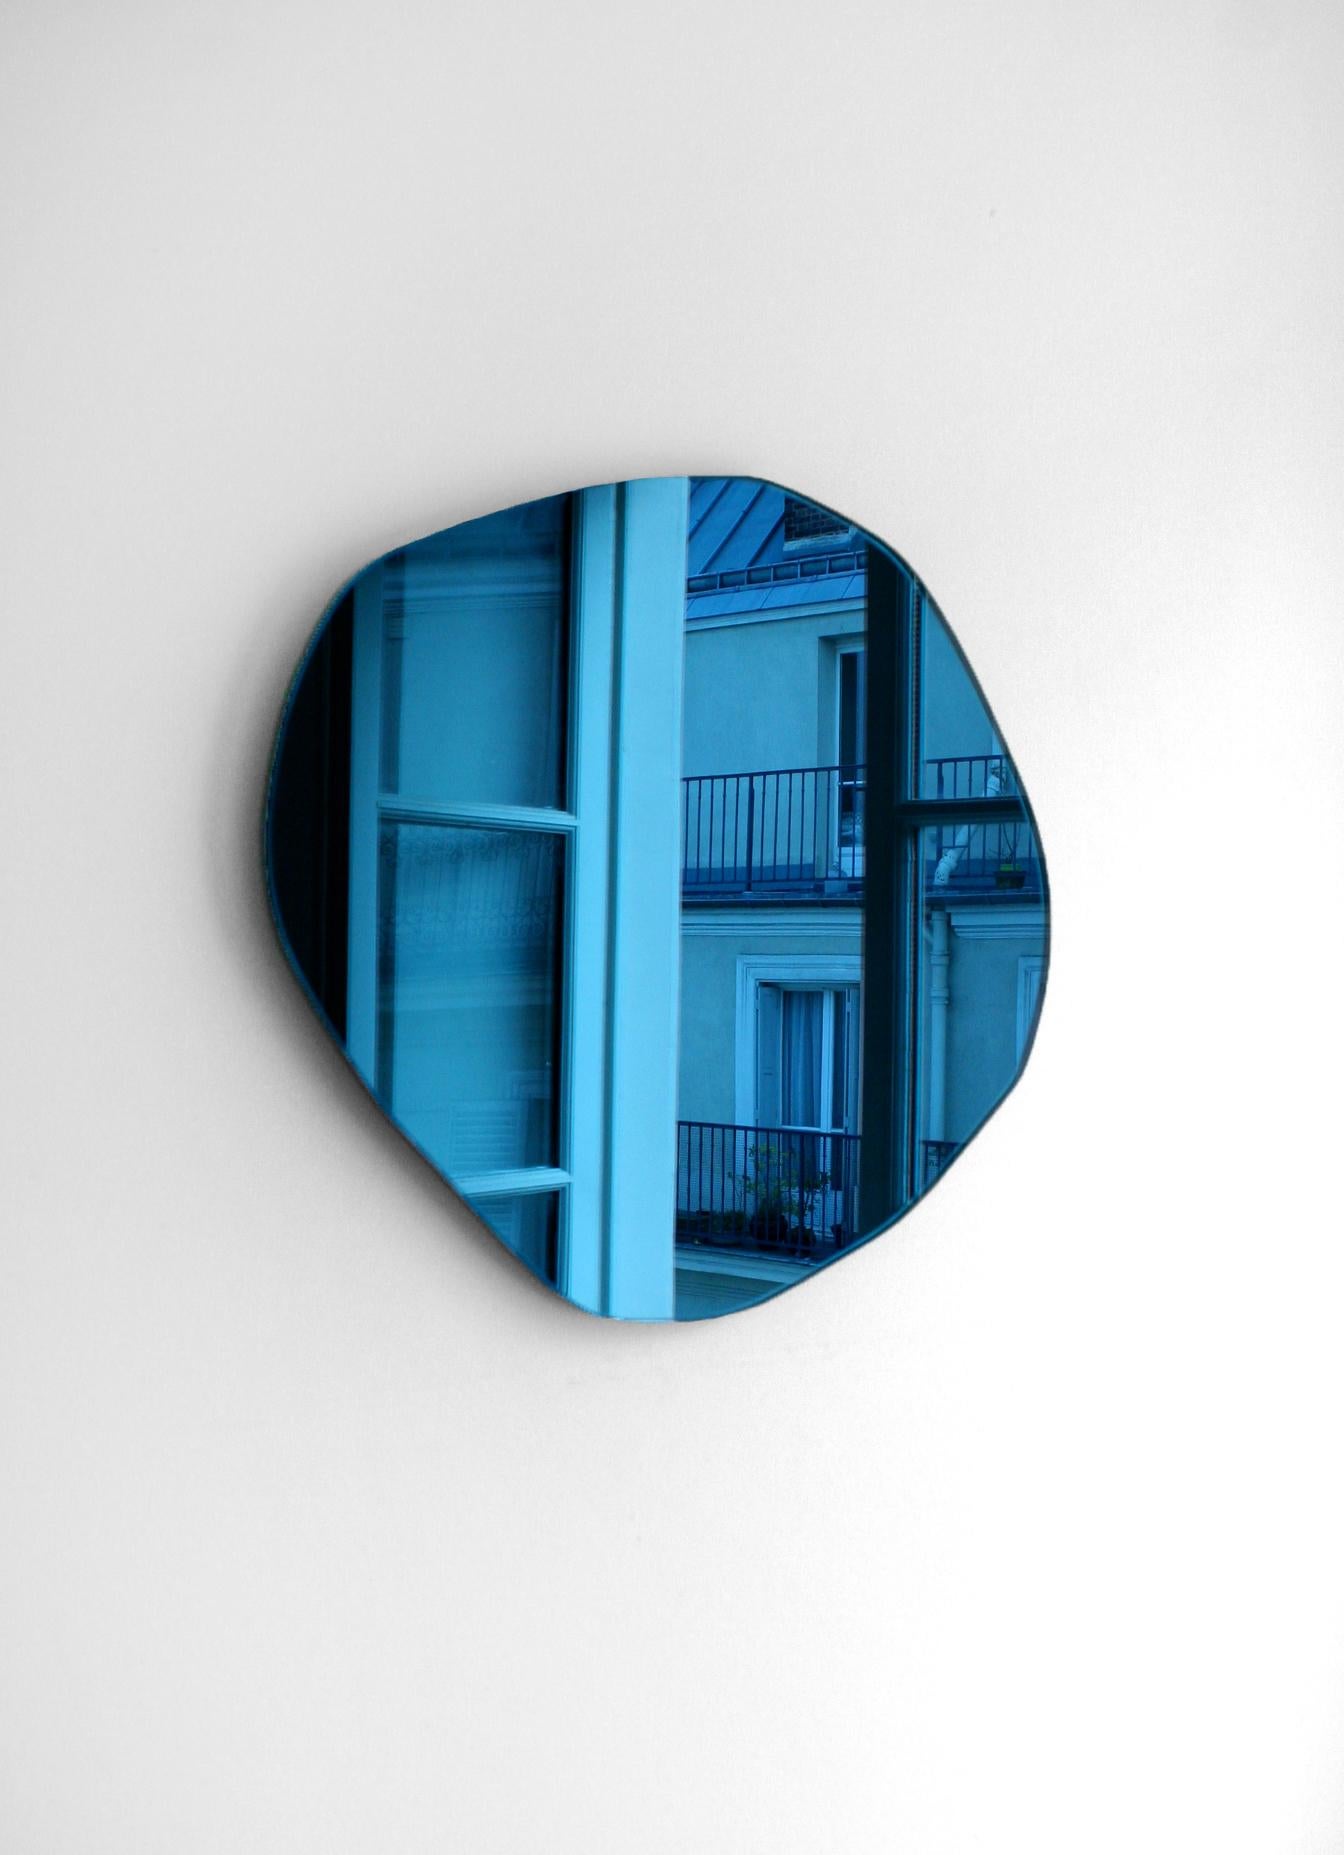 Le Ciel Large Hand-Sculpted, Laurene Guarneri
Limited edition, signed and numbered
Handmade
Materials: Blue Tinted Mirror
Dimensions: 100 x 80 x 1,6 cm
(Could be made to order in other dimensions)
Hang hook supplied

Each model being handmade can be